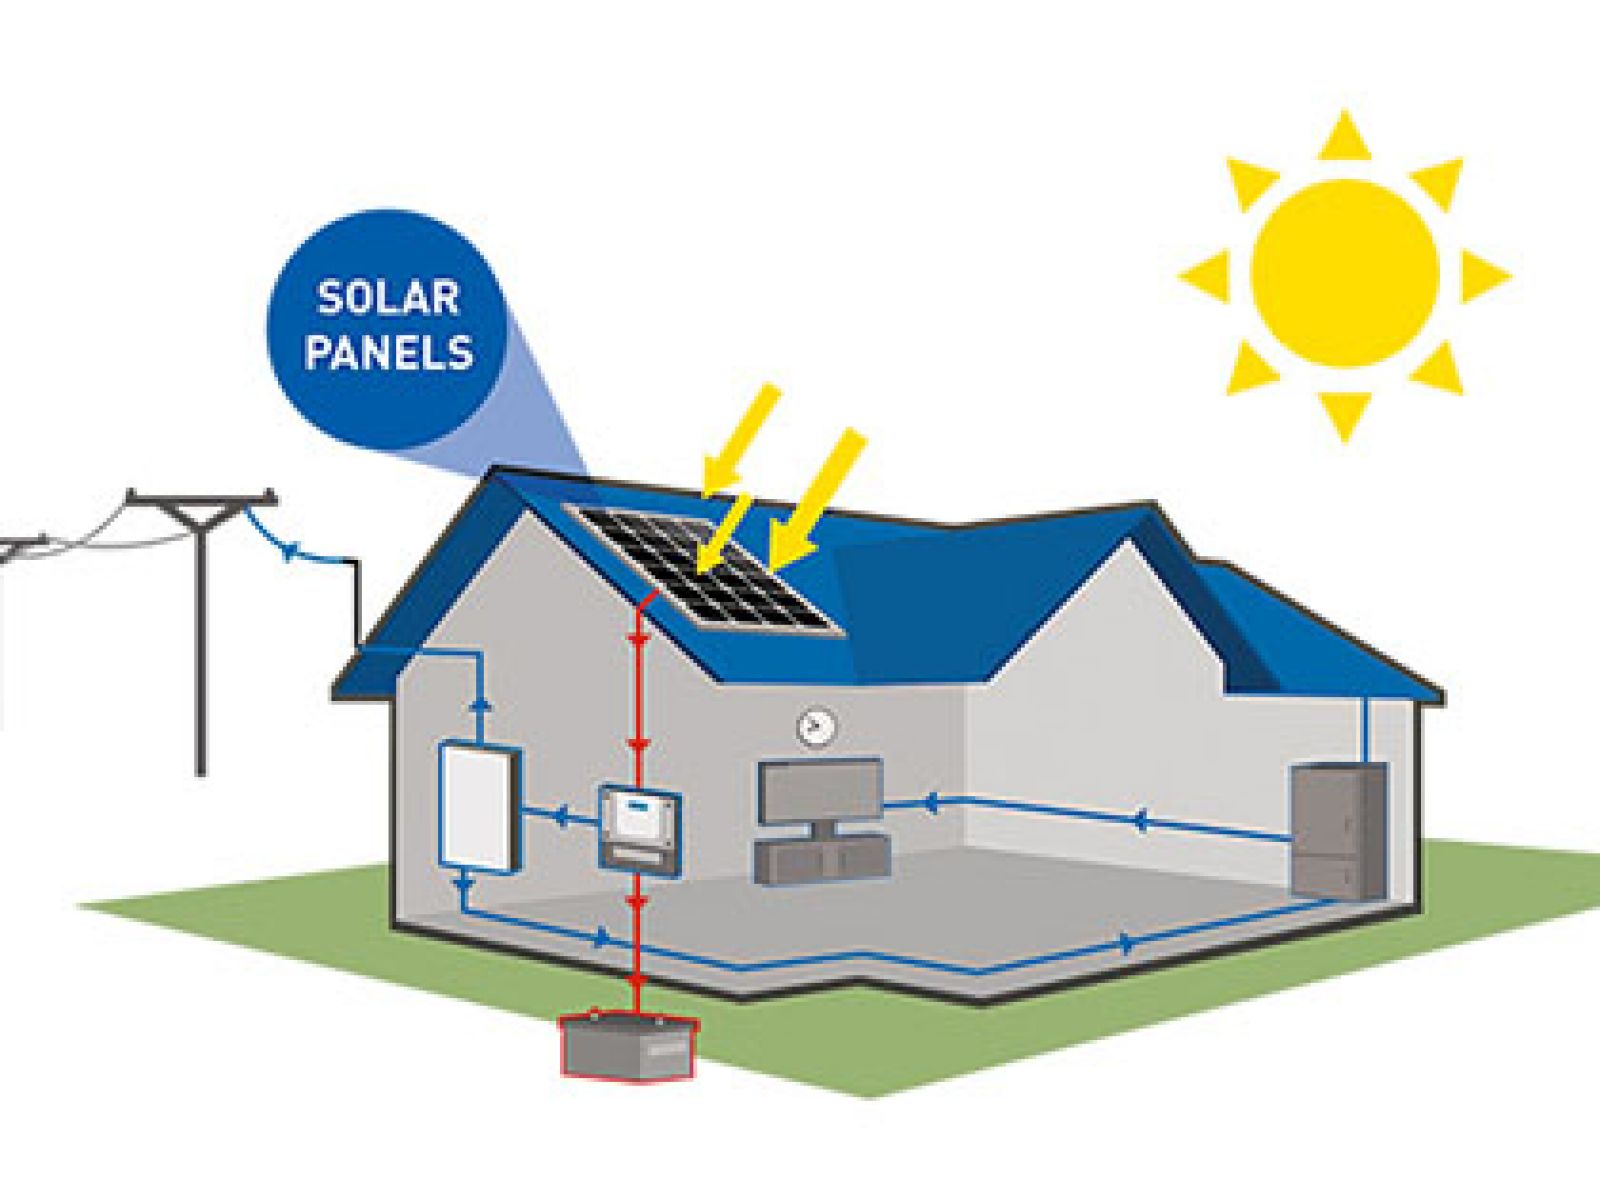 Illustration of a house fitted with solar panels, showing how solar panels generate energy from the sun overhead, and how this energy is then used throughout the house. 